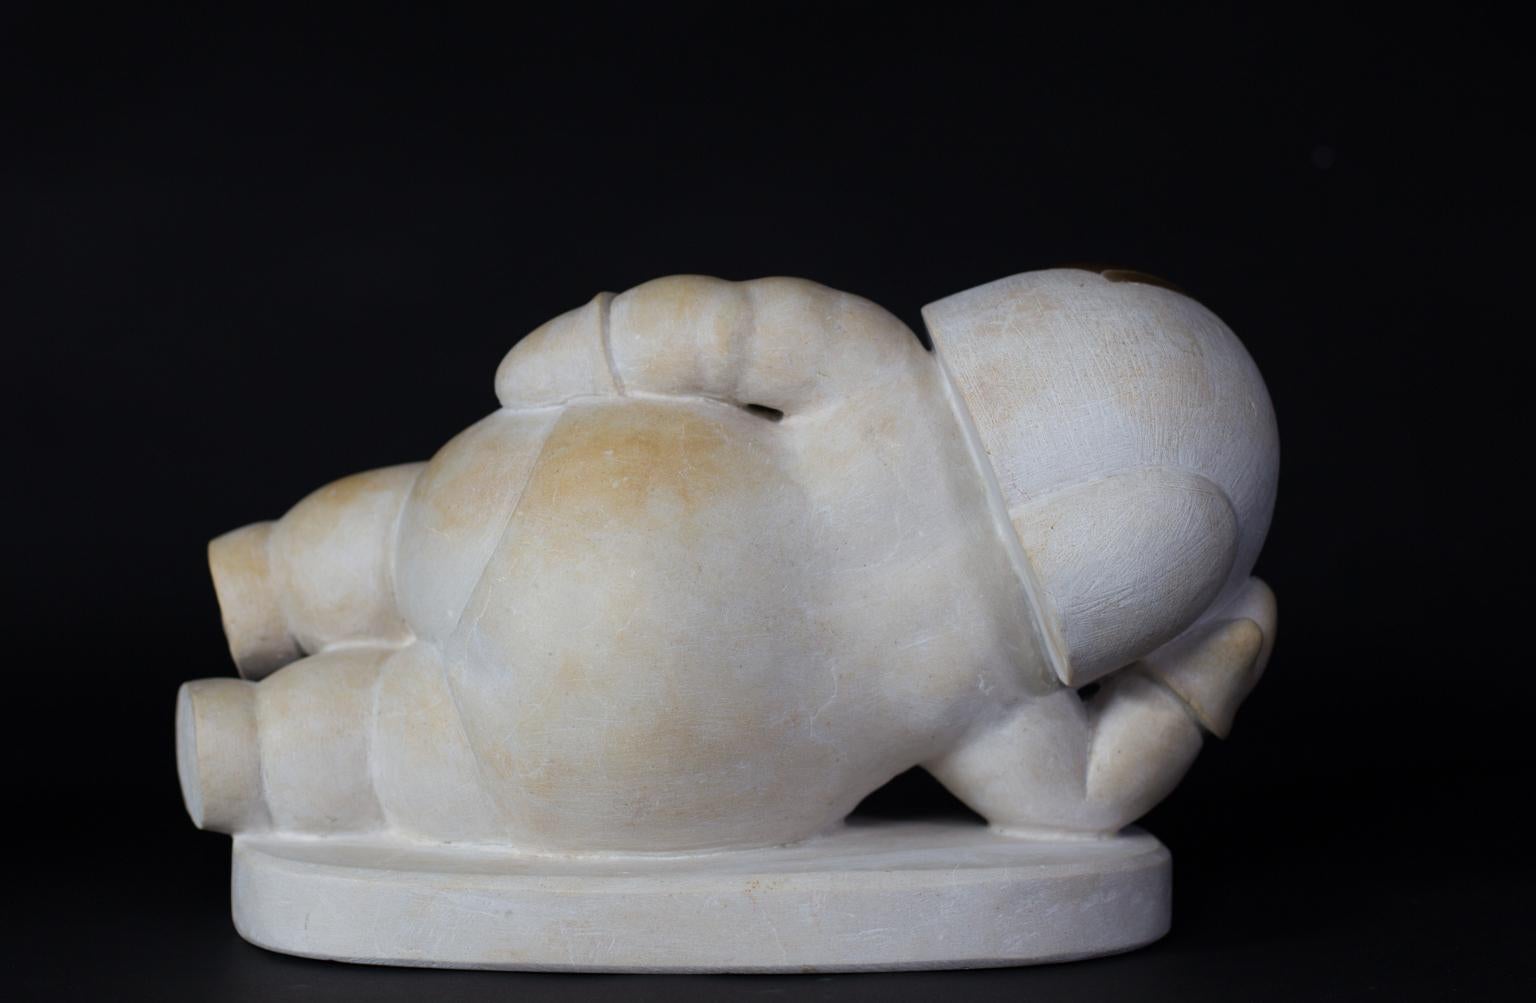 New Age Explores. Nº 6 Venus. Figurative Marble Sculpture by Mario Romero
Technique: Sculpted stone 
Material: Alabaster and Cream marble.
Measures: 22 H x 37 W x 19 D cm
Weight: 18.0kg

The treatment of the volume, accompanied by fine and subtle